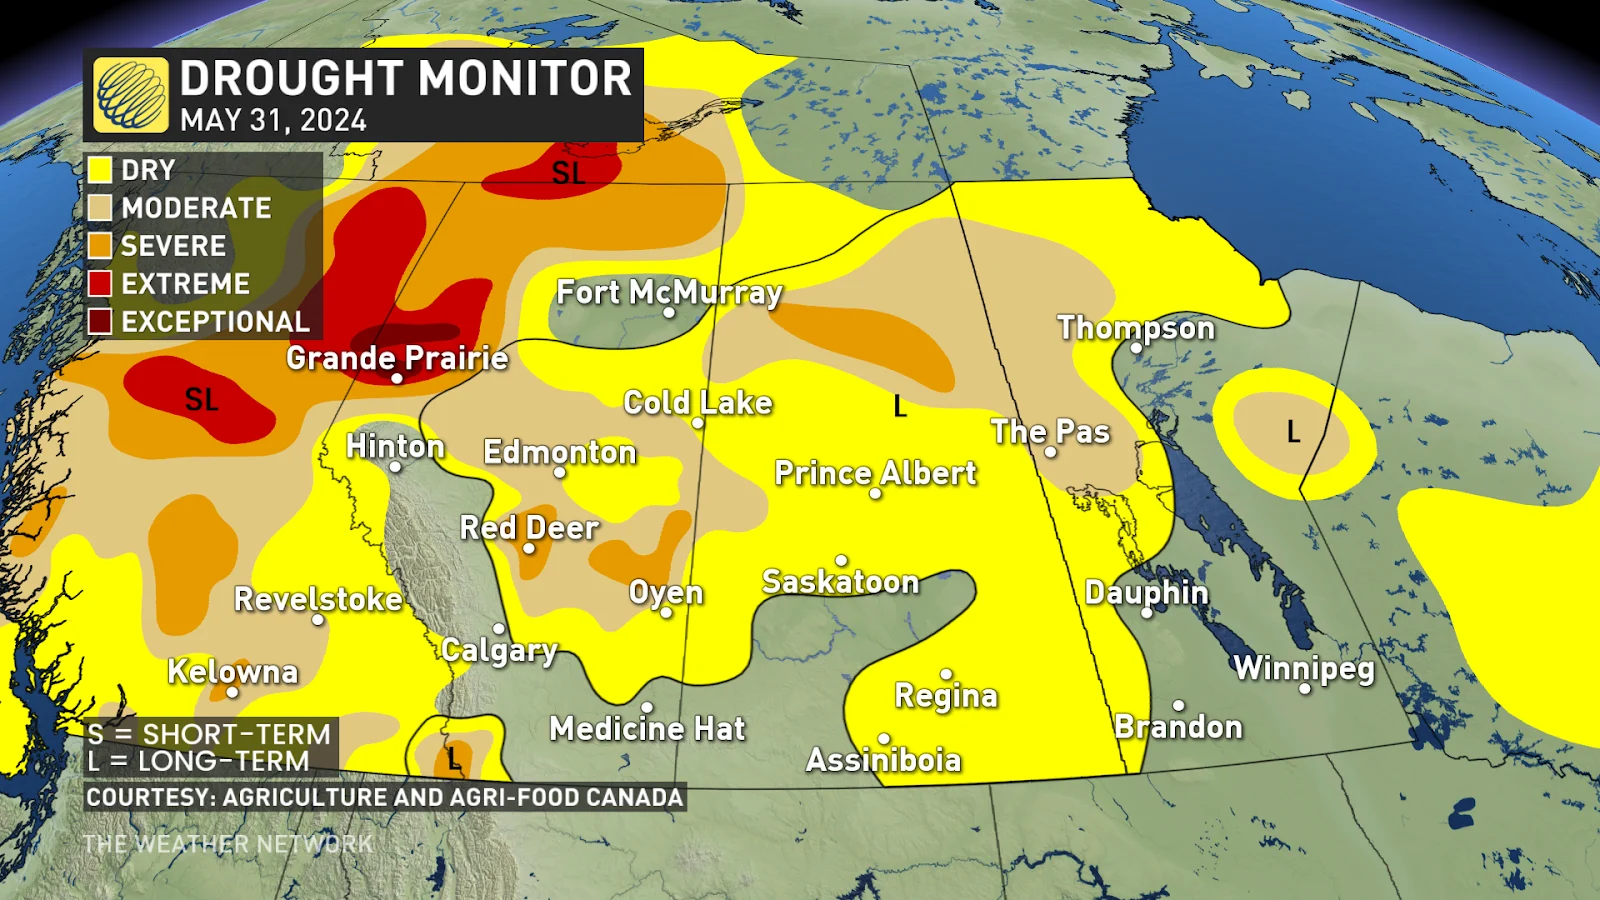 Western Canada drought monitor as of May 31, 2024